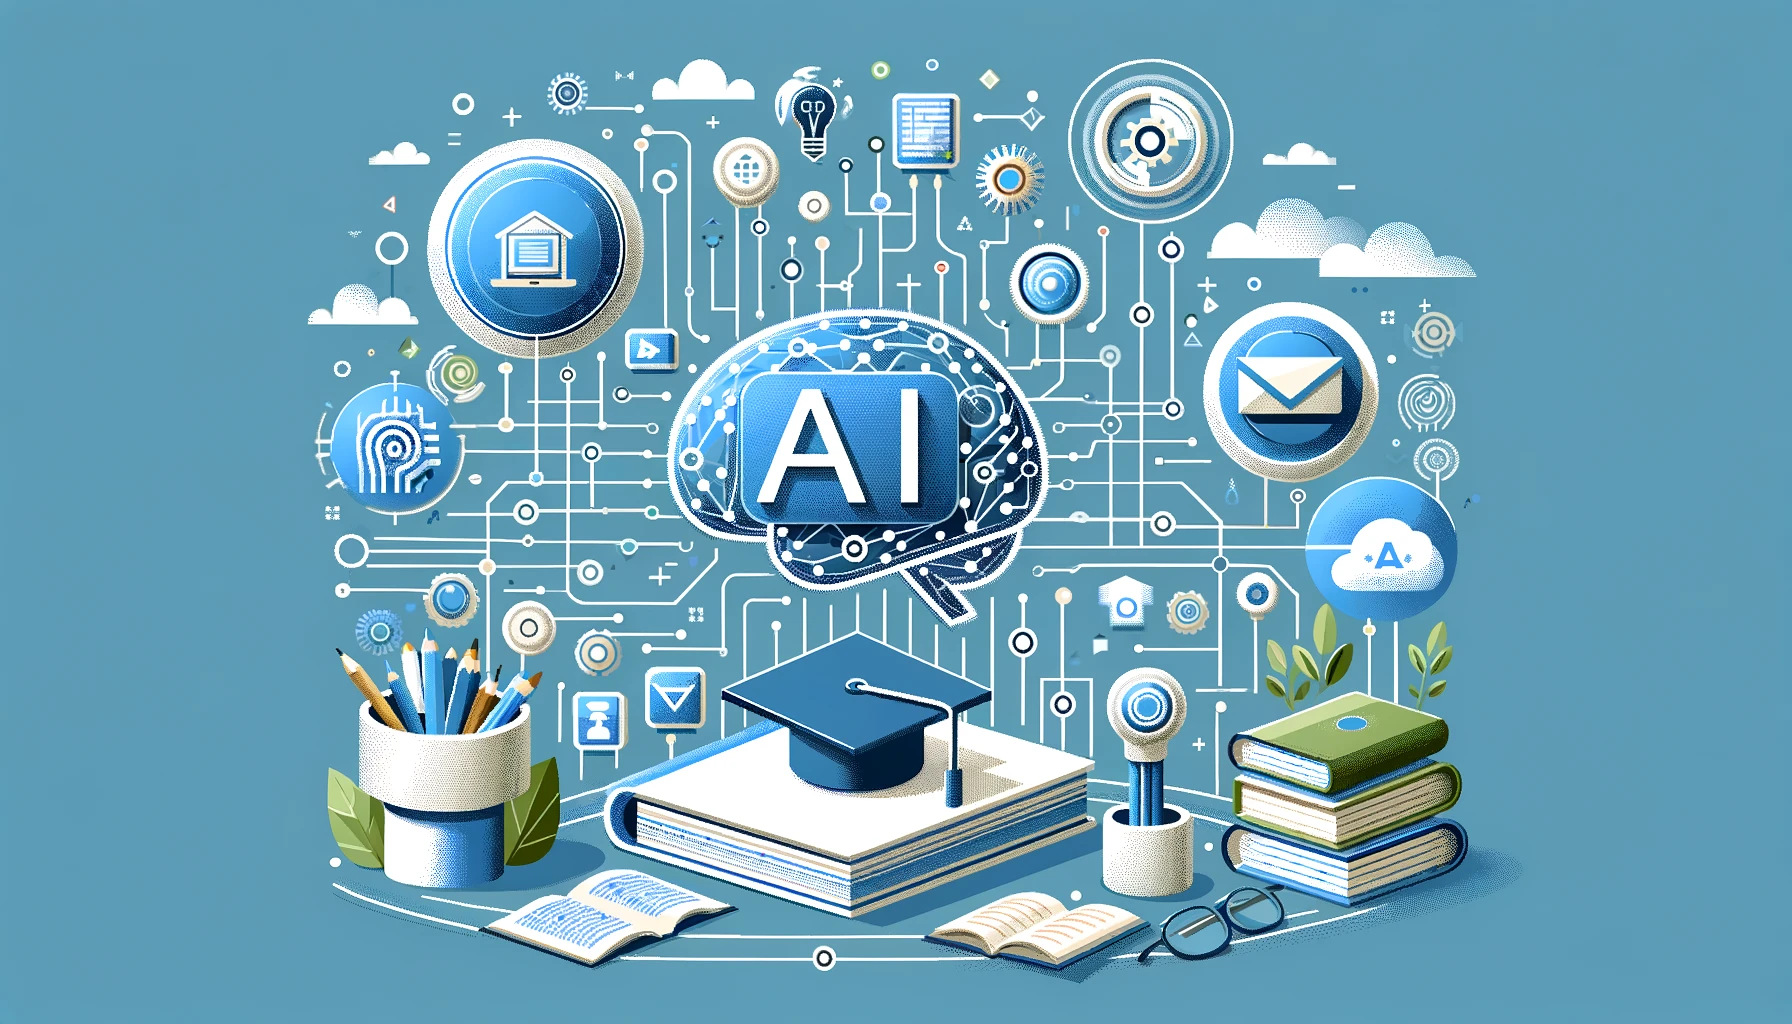 AI can potentially improve education through various key initiatives and great solutions.